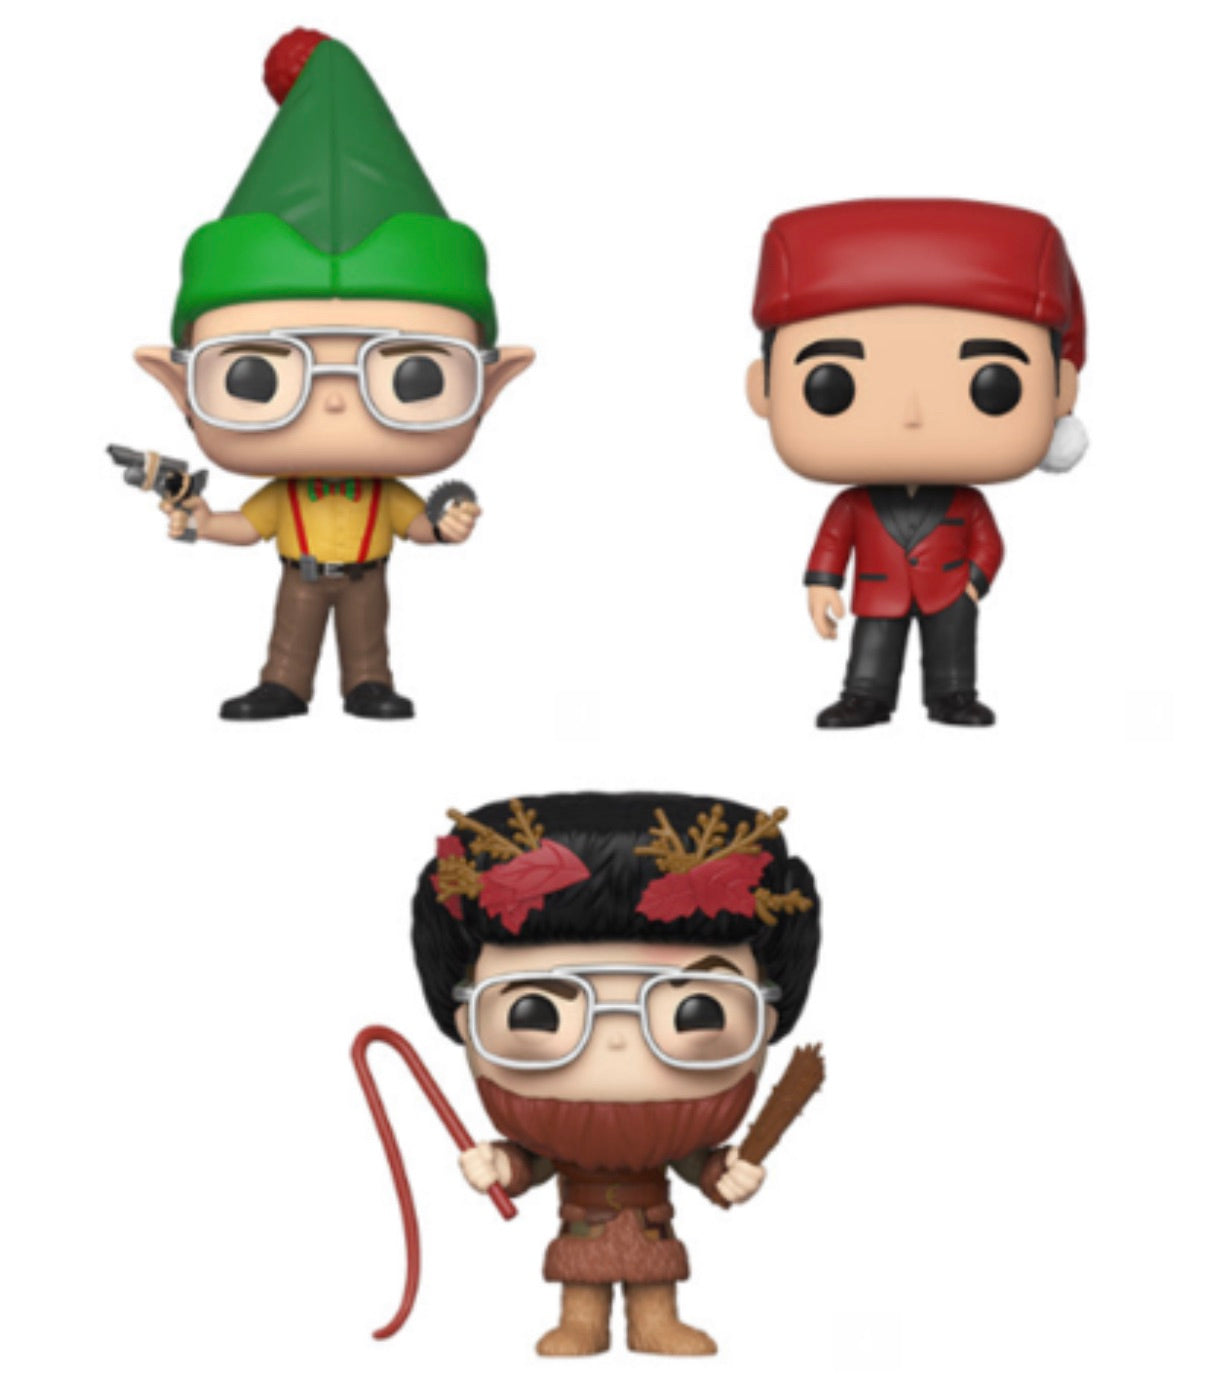 THE OFFICE HOLIDAY FUNKO POP! COMPLETE SET OF 3 (IN STOCK)